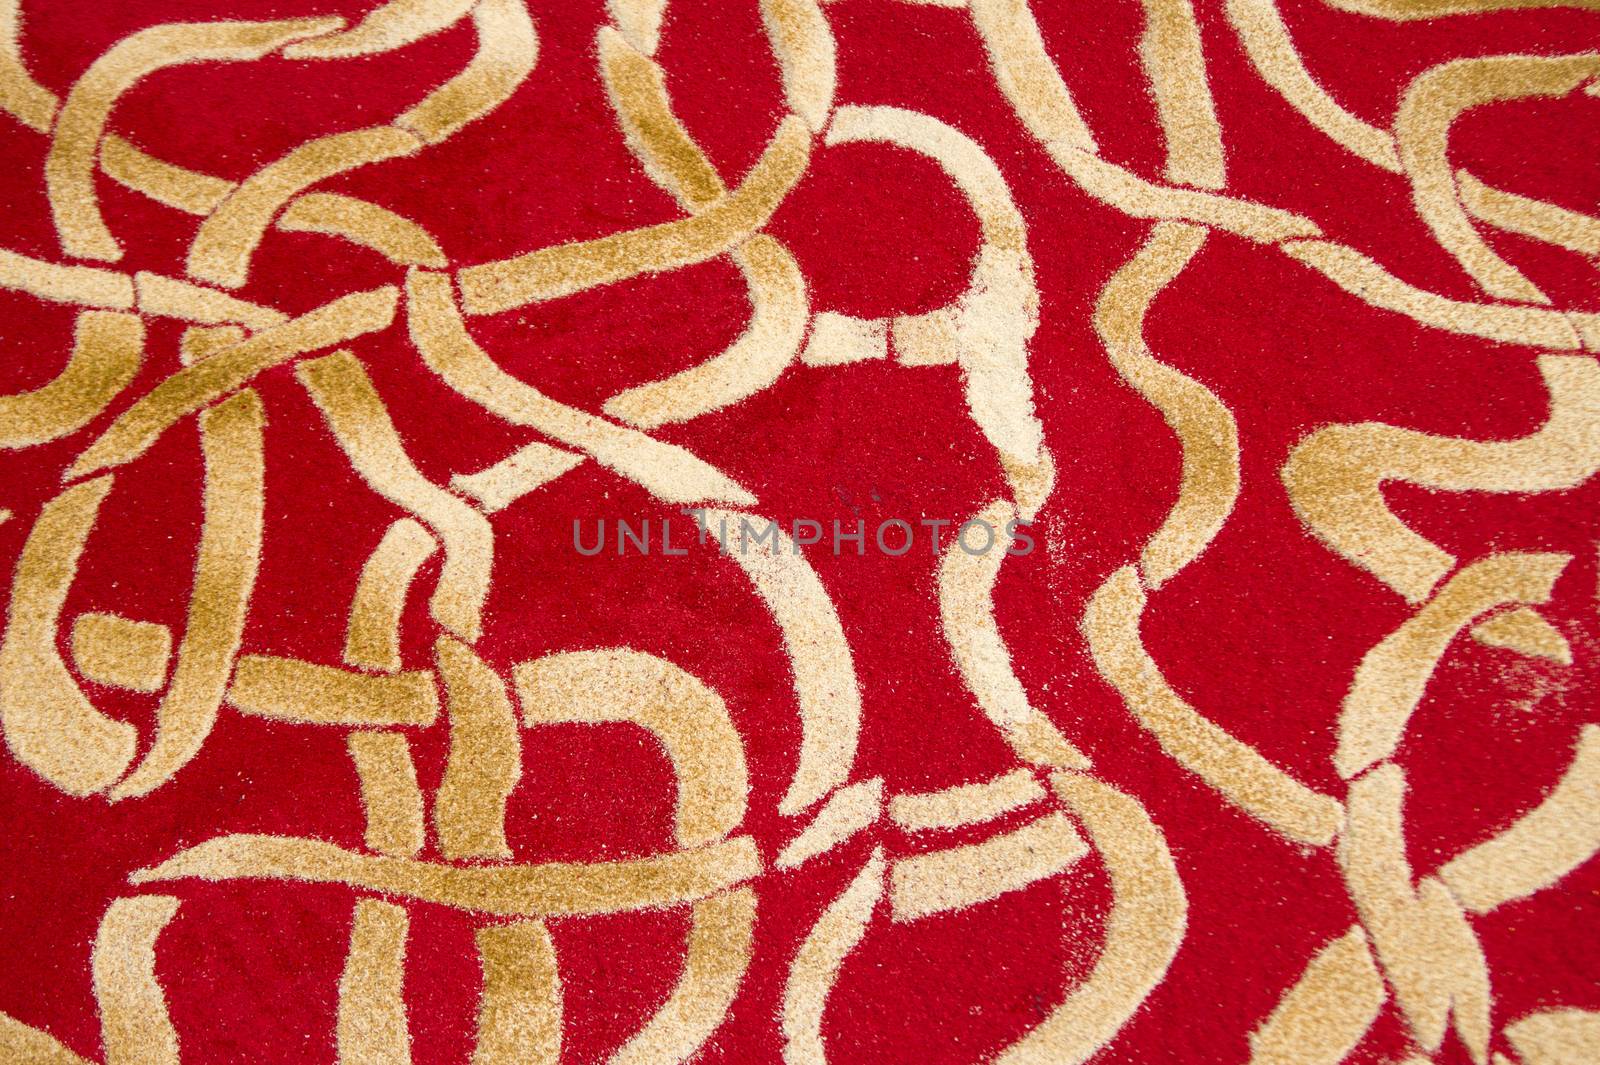 Small details of colored carpets performed with the use of wood sawdust